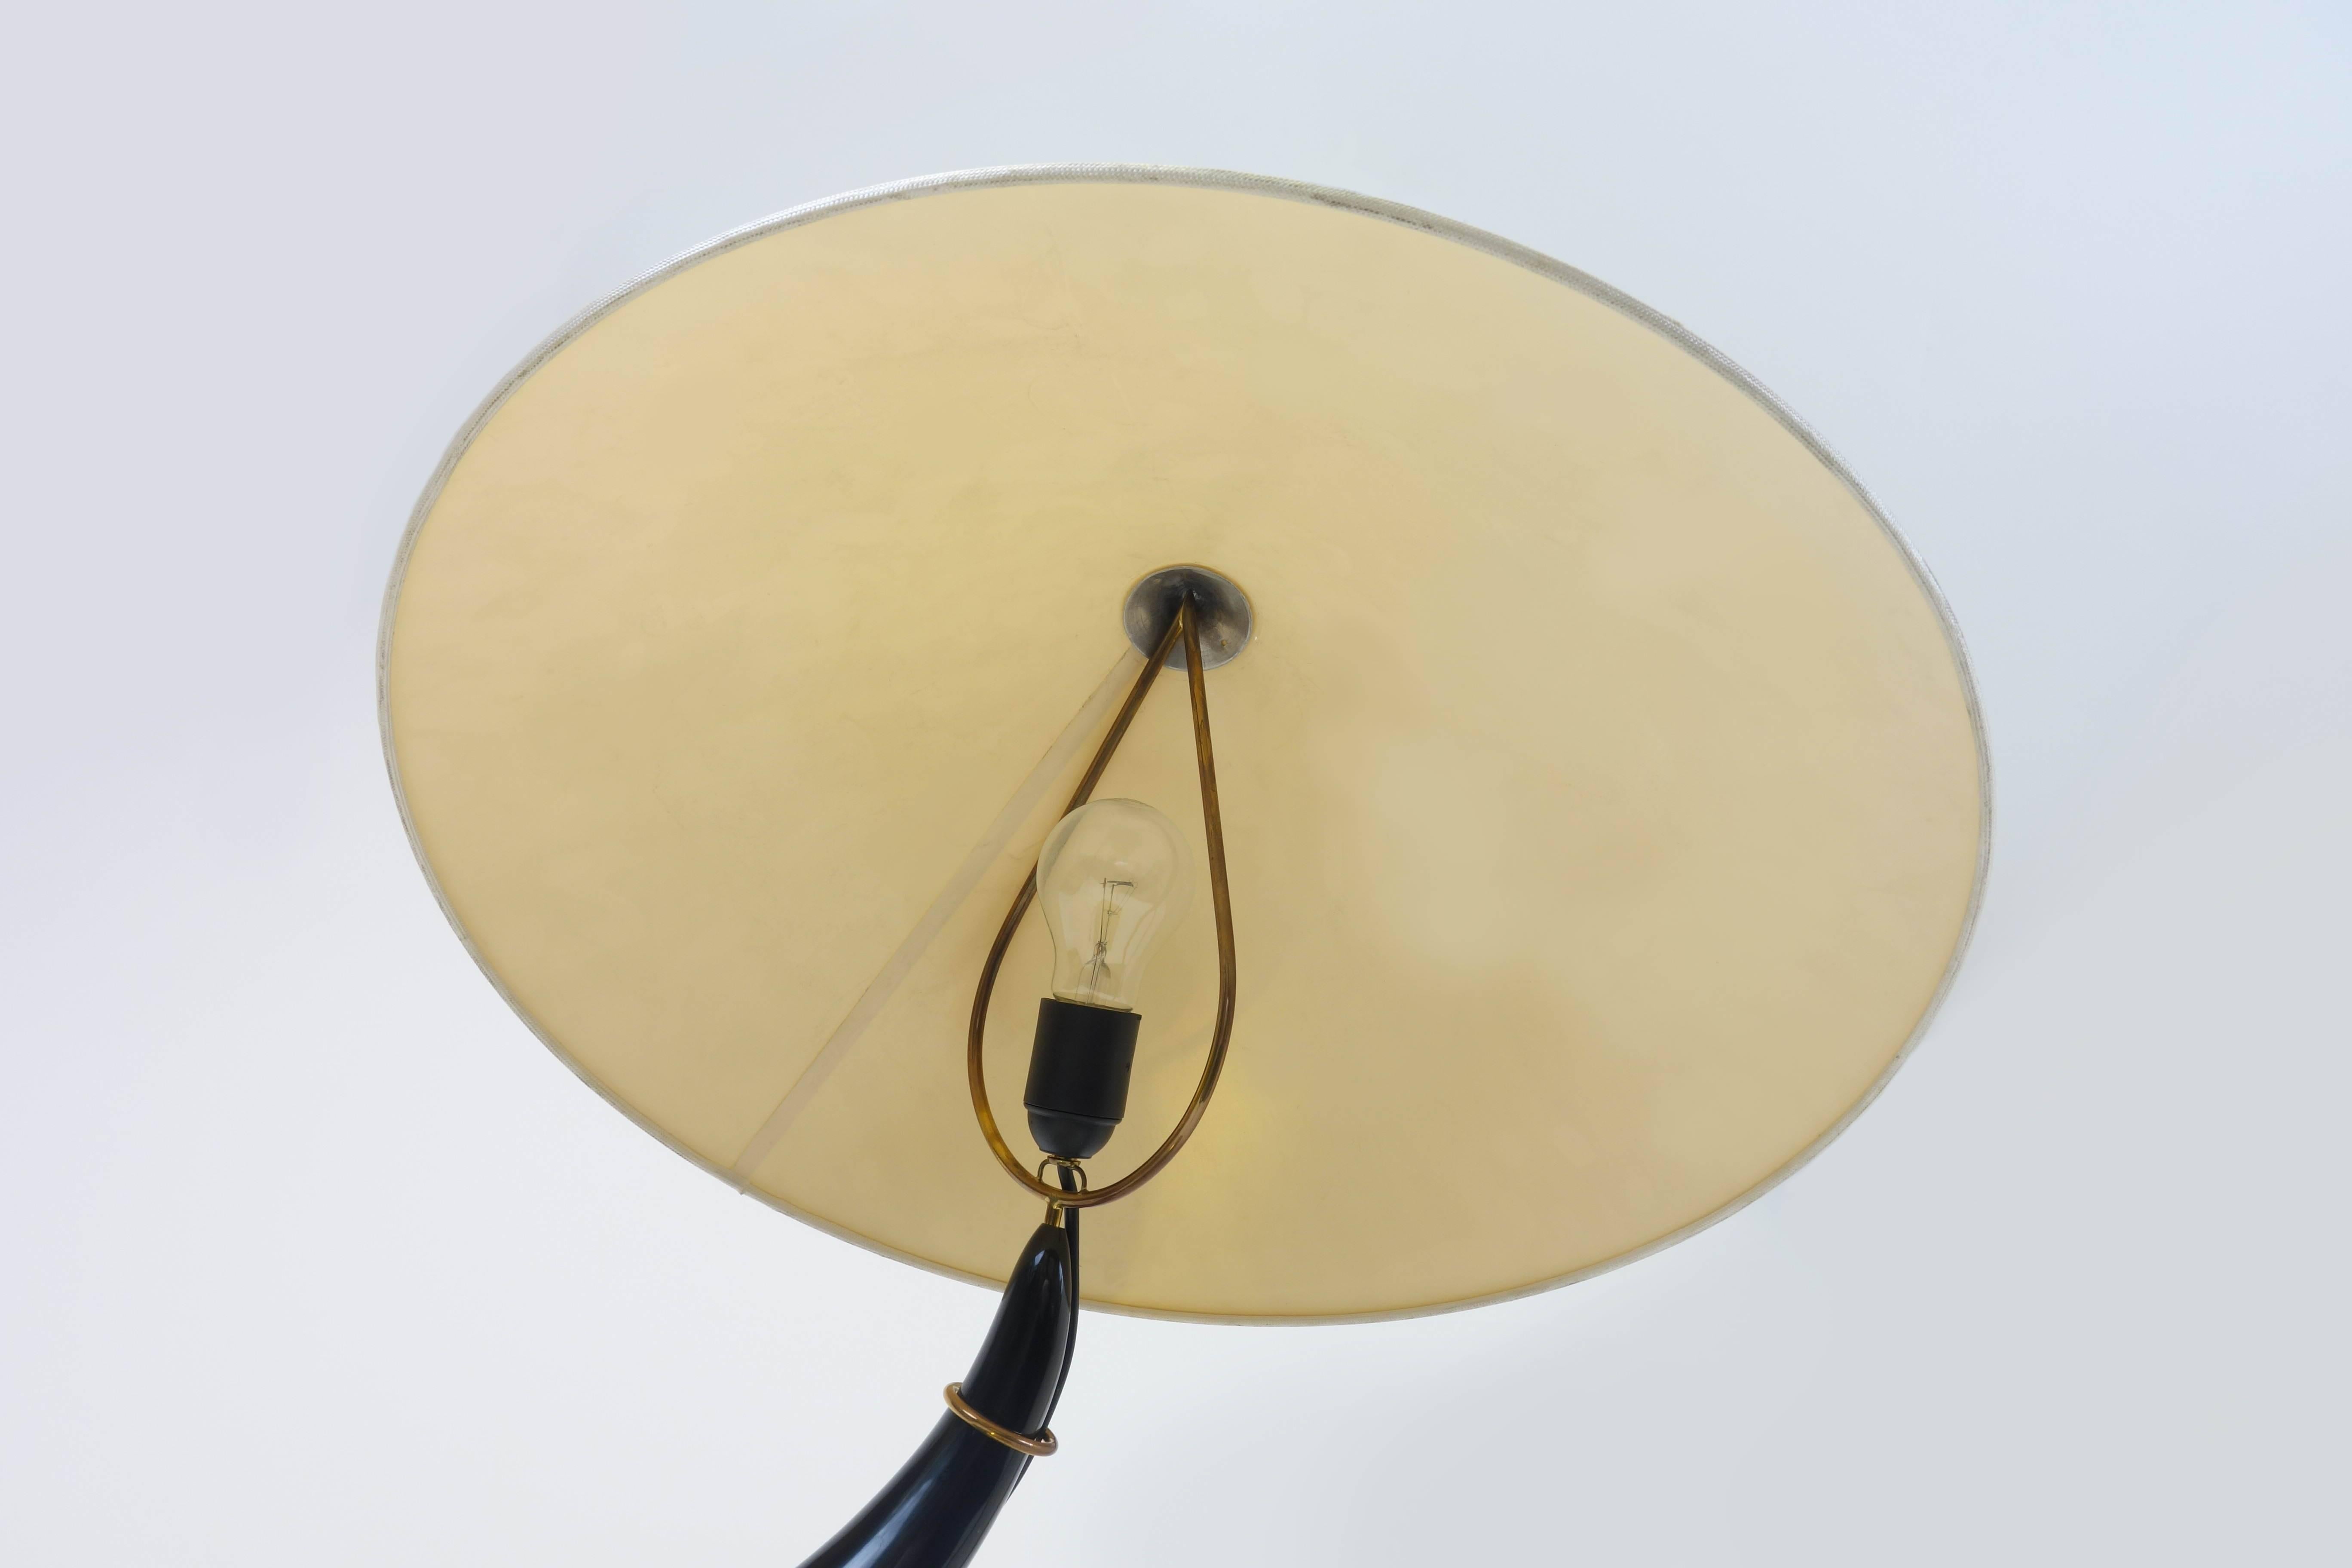 Table lamp 7255/2 of Cow Horn on brass plinth by Carl Auboeck, Vienna. It has one bulb under the lyra-shaped mounting of the lampshade.